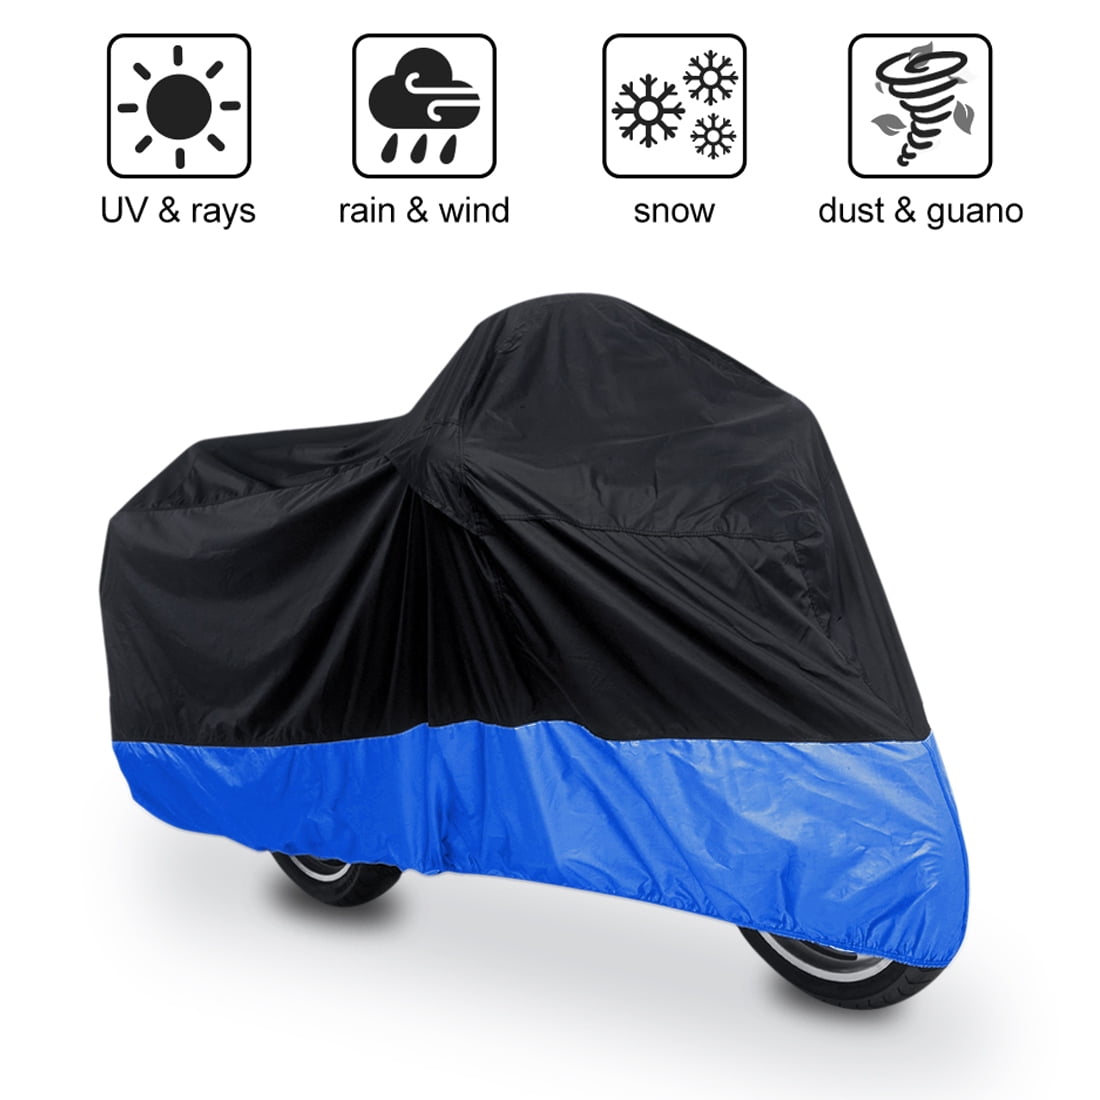 4XL UV Resistant Motorcycle Cover For Honda Goldwing 1100 1200 1500 1800 GL F6B 